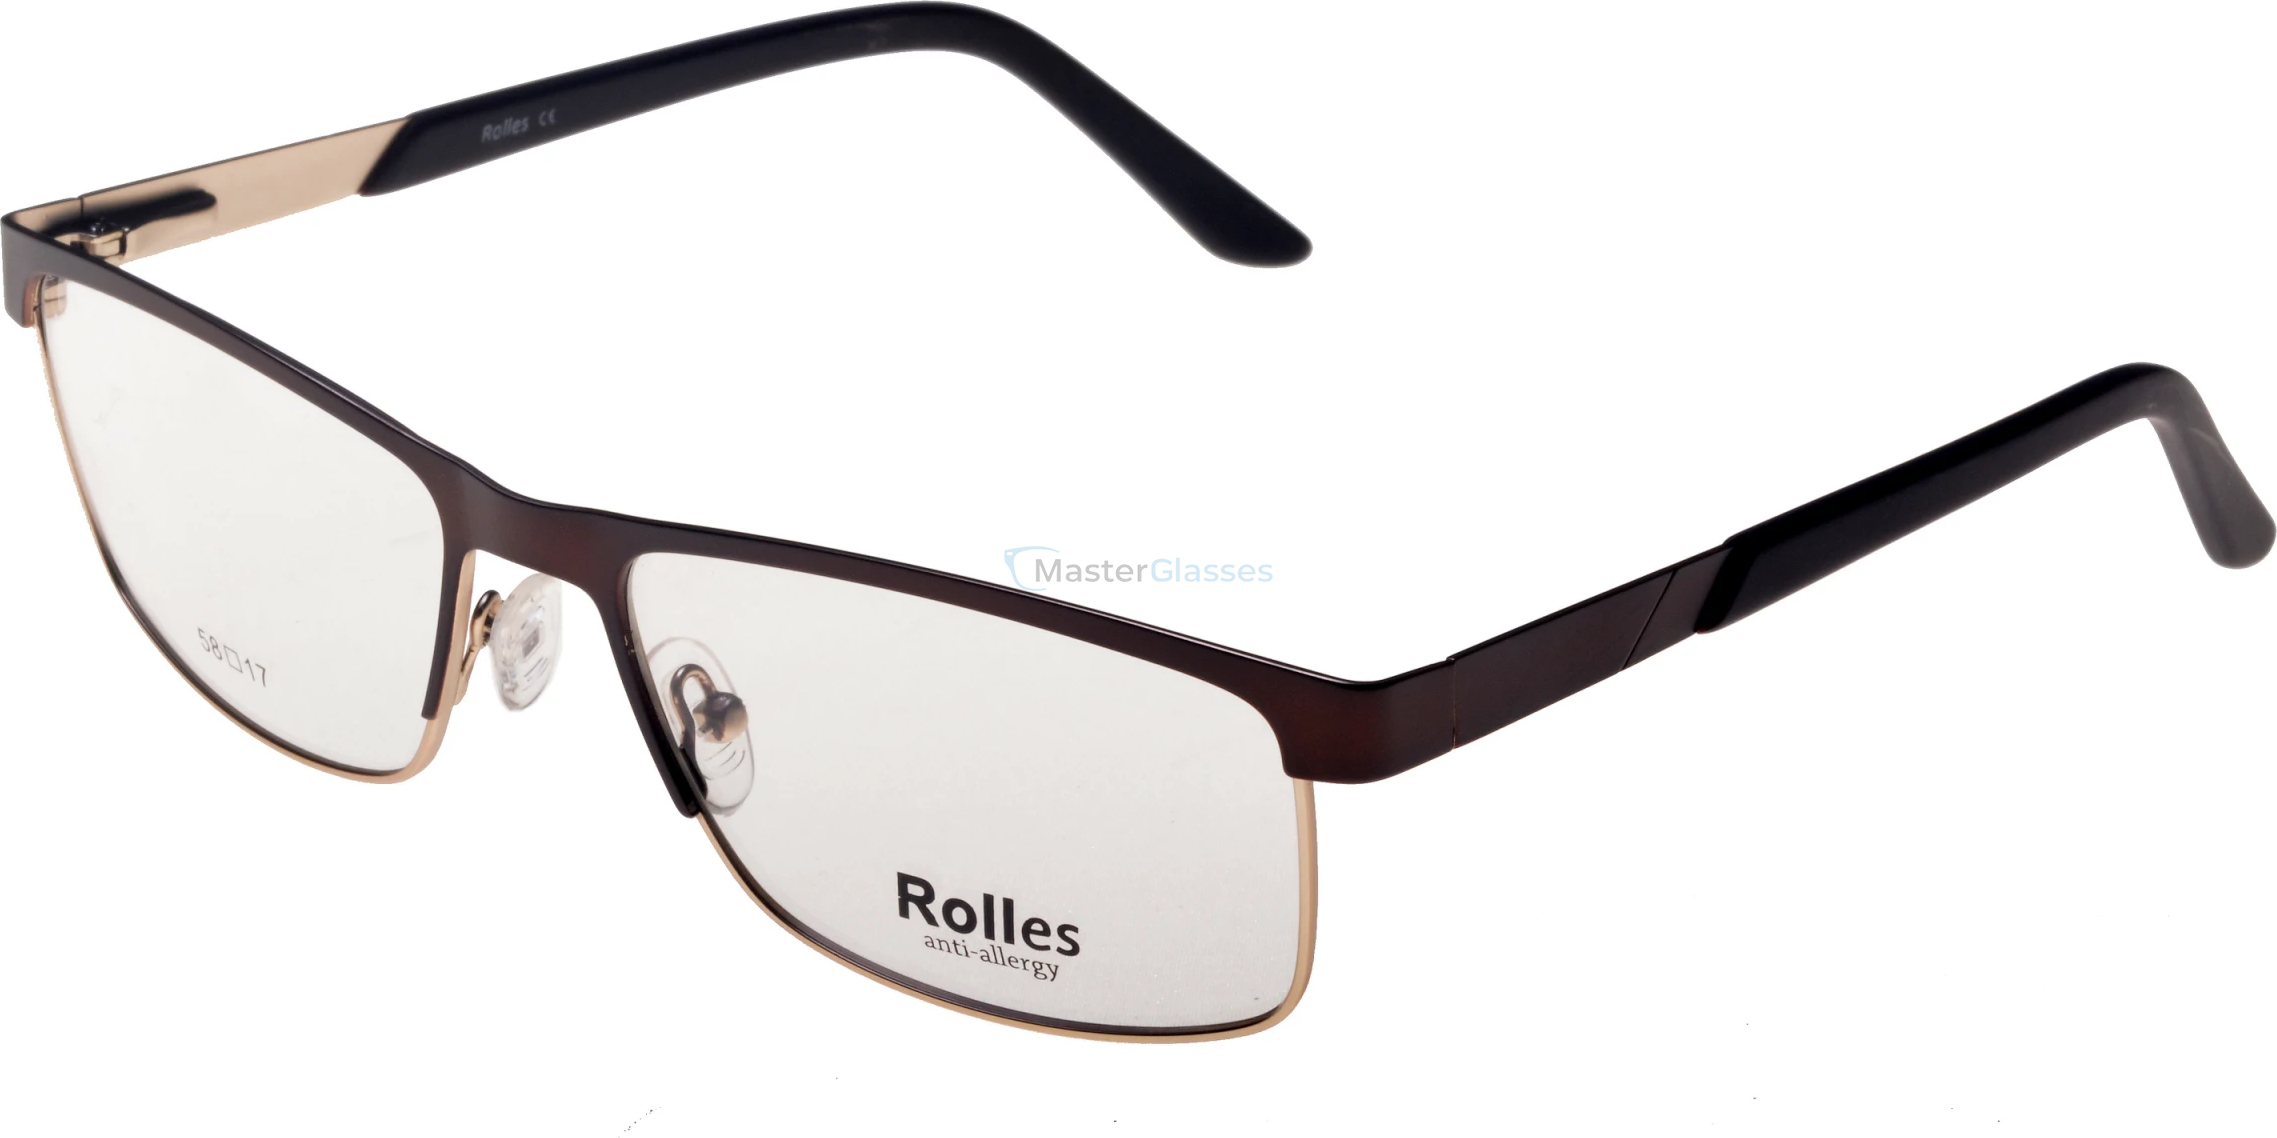  Rolles 605 03